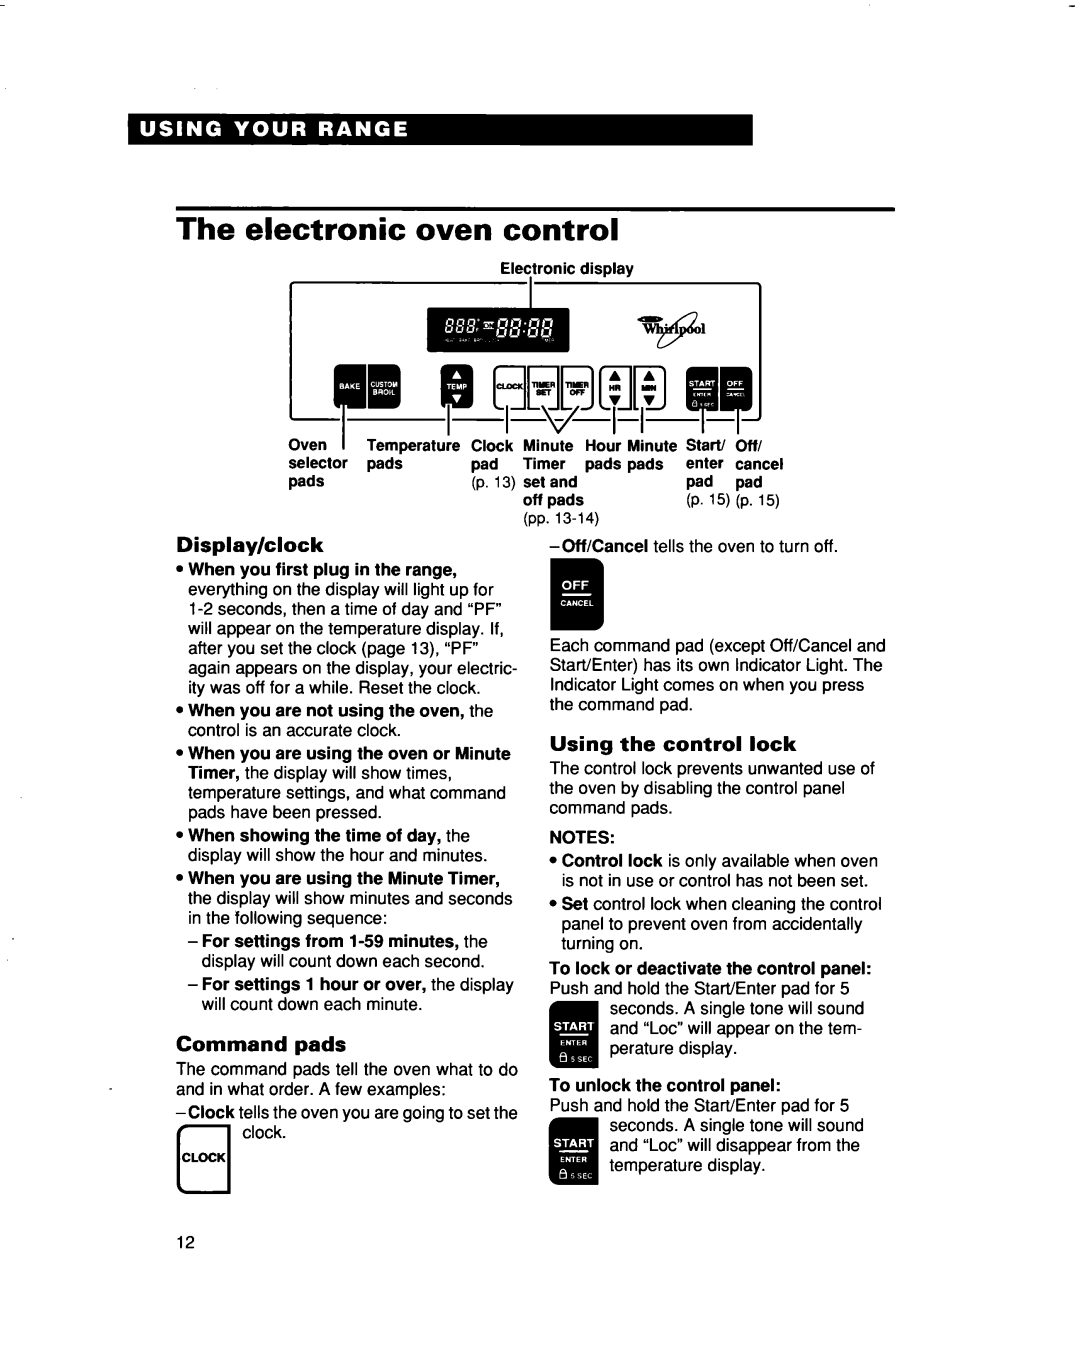 Whirlpool RF315PXD manual The electronic oven control, Display/clock, Command pads, Using the control lock 